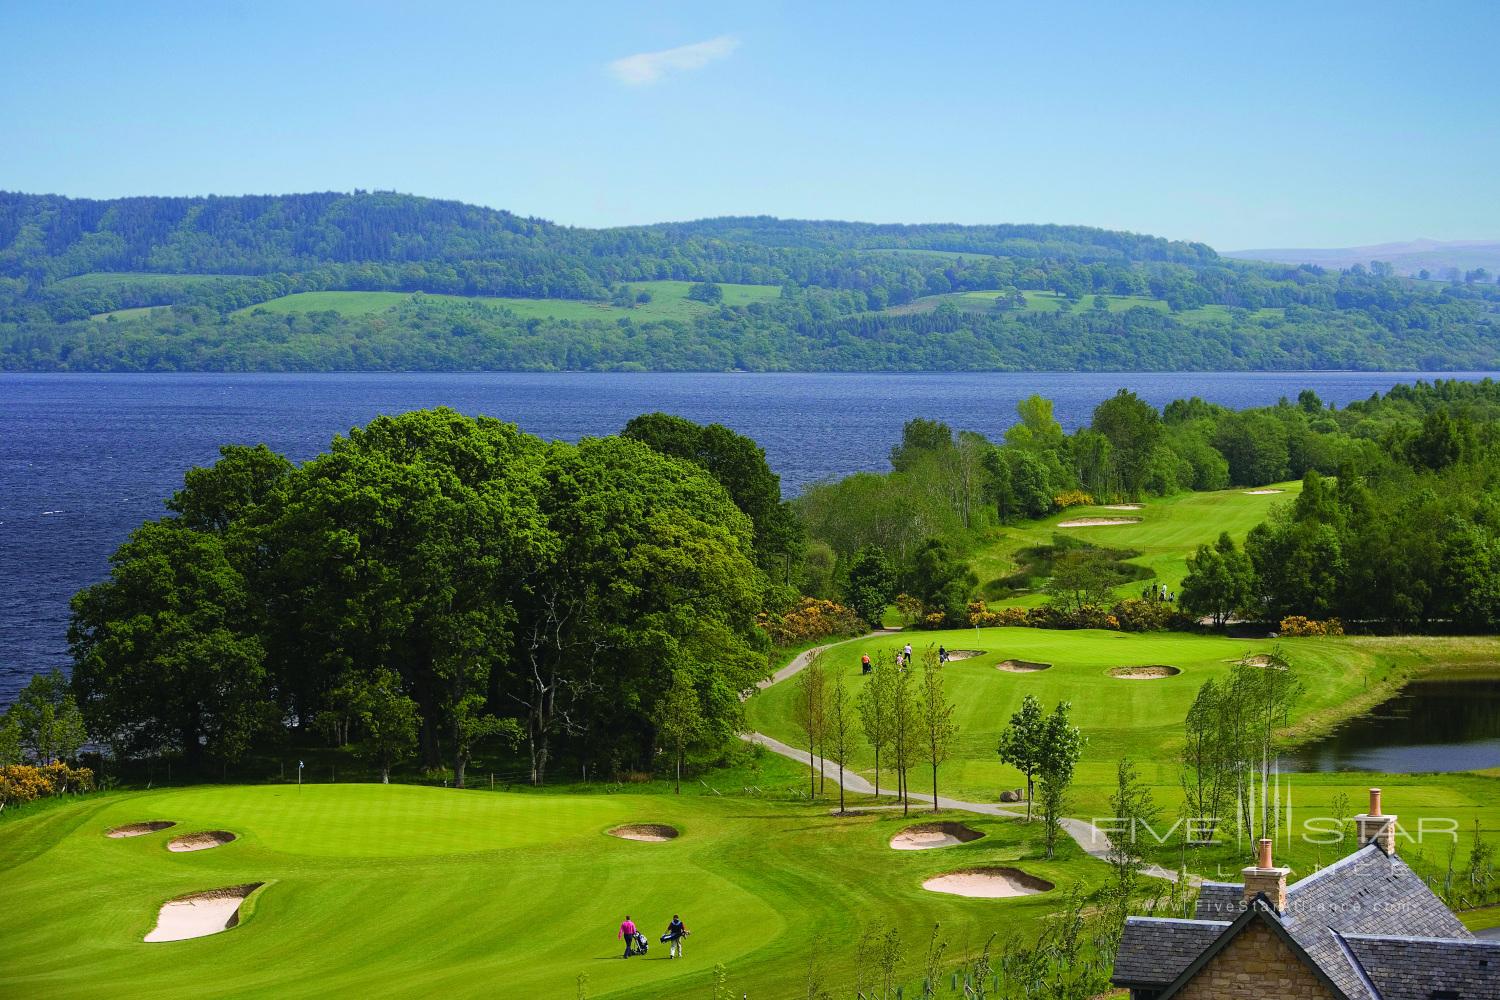 15th, 16th, and 17th Green at Cameron House on Loch Lomond